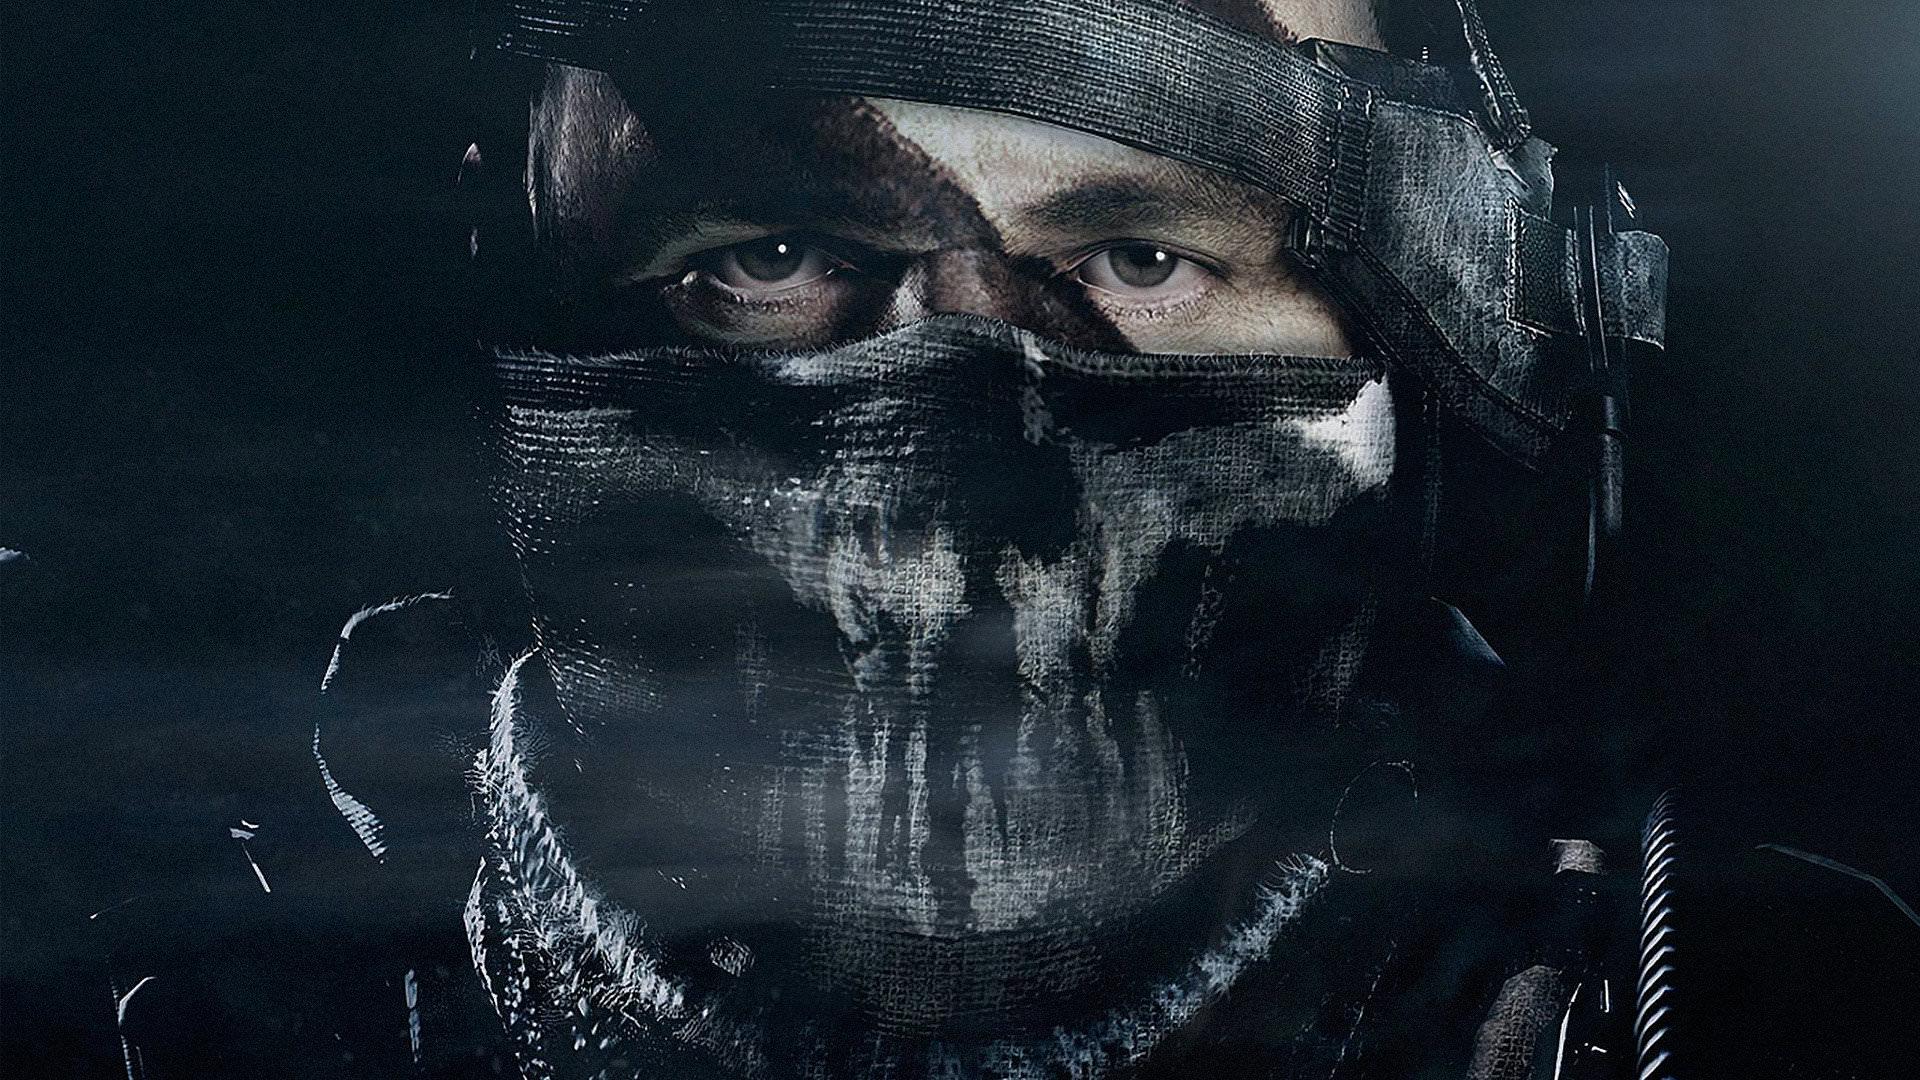 Call Of Duty: Ghosts wallpaper HD for desktop background